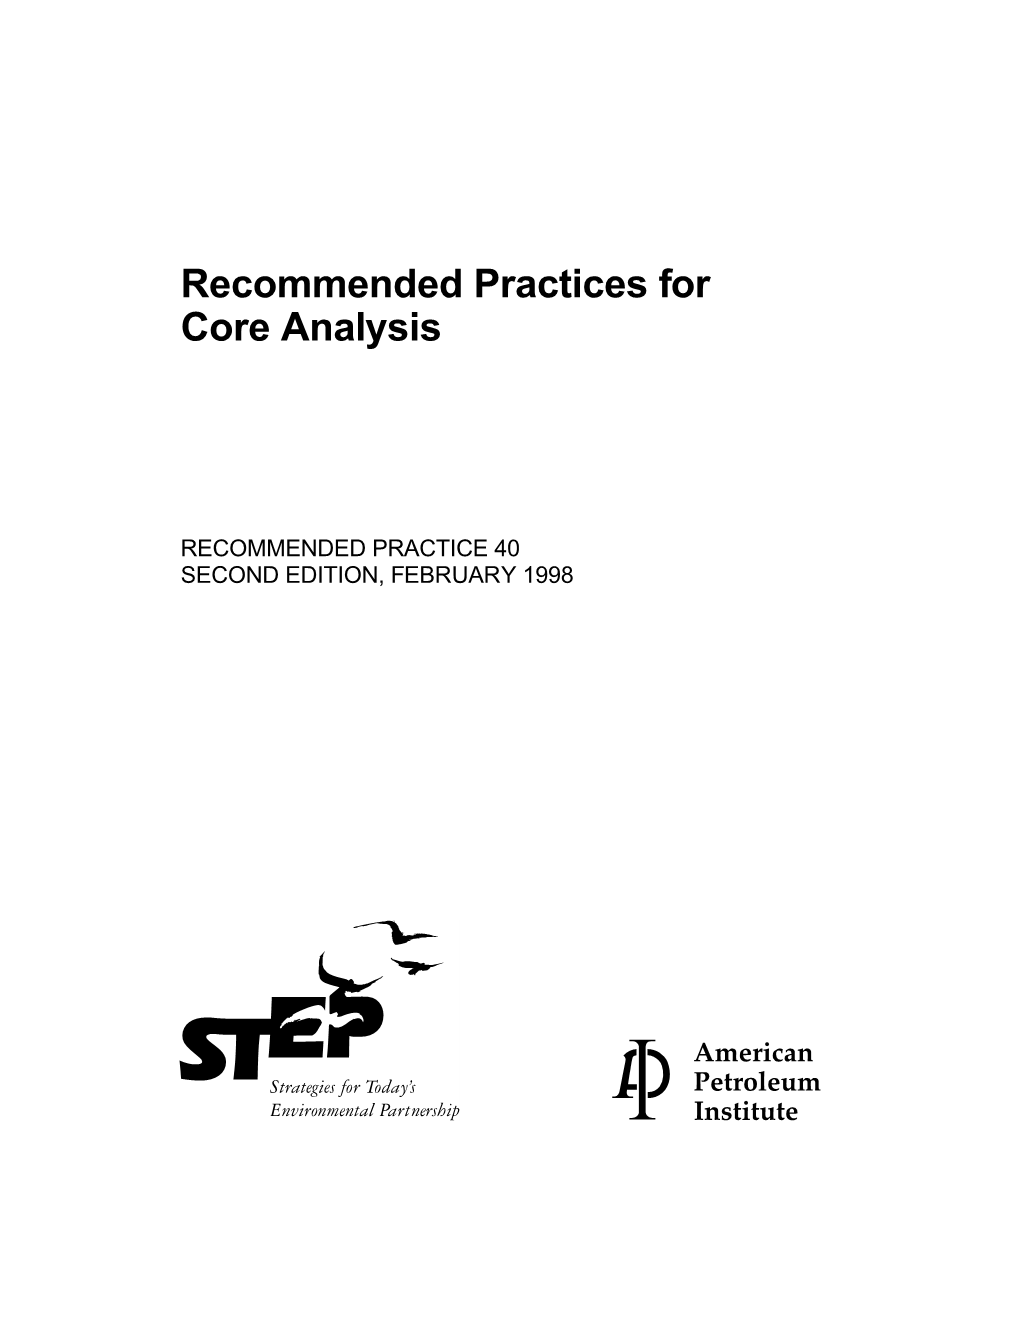 Recommended Practices for Core Analysis